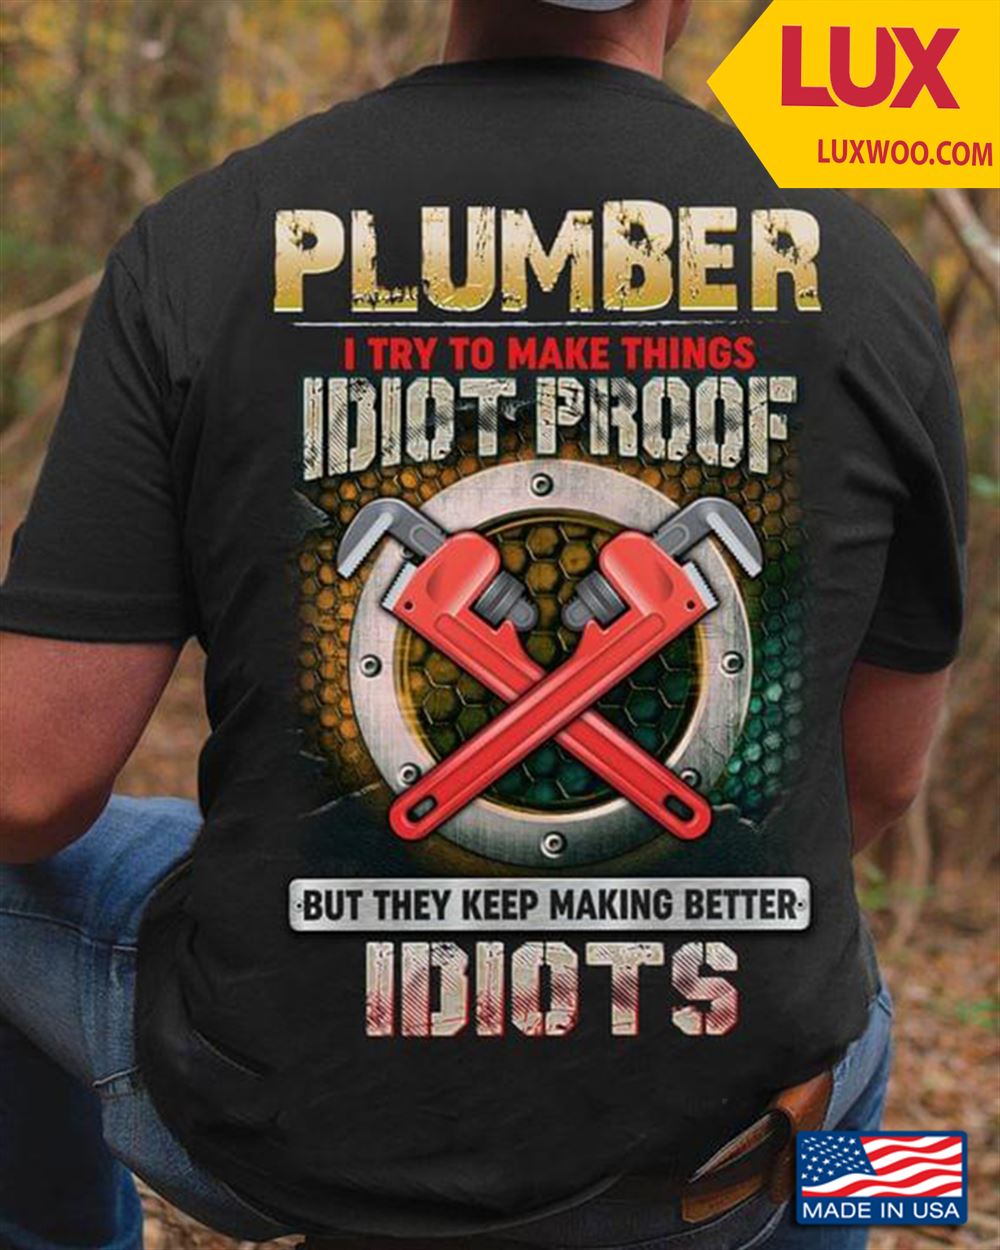 Plumber I Try To Make Things Idiot Proof But They Keep Making Better Idiots Shirt Size Up To 5xl